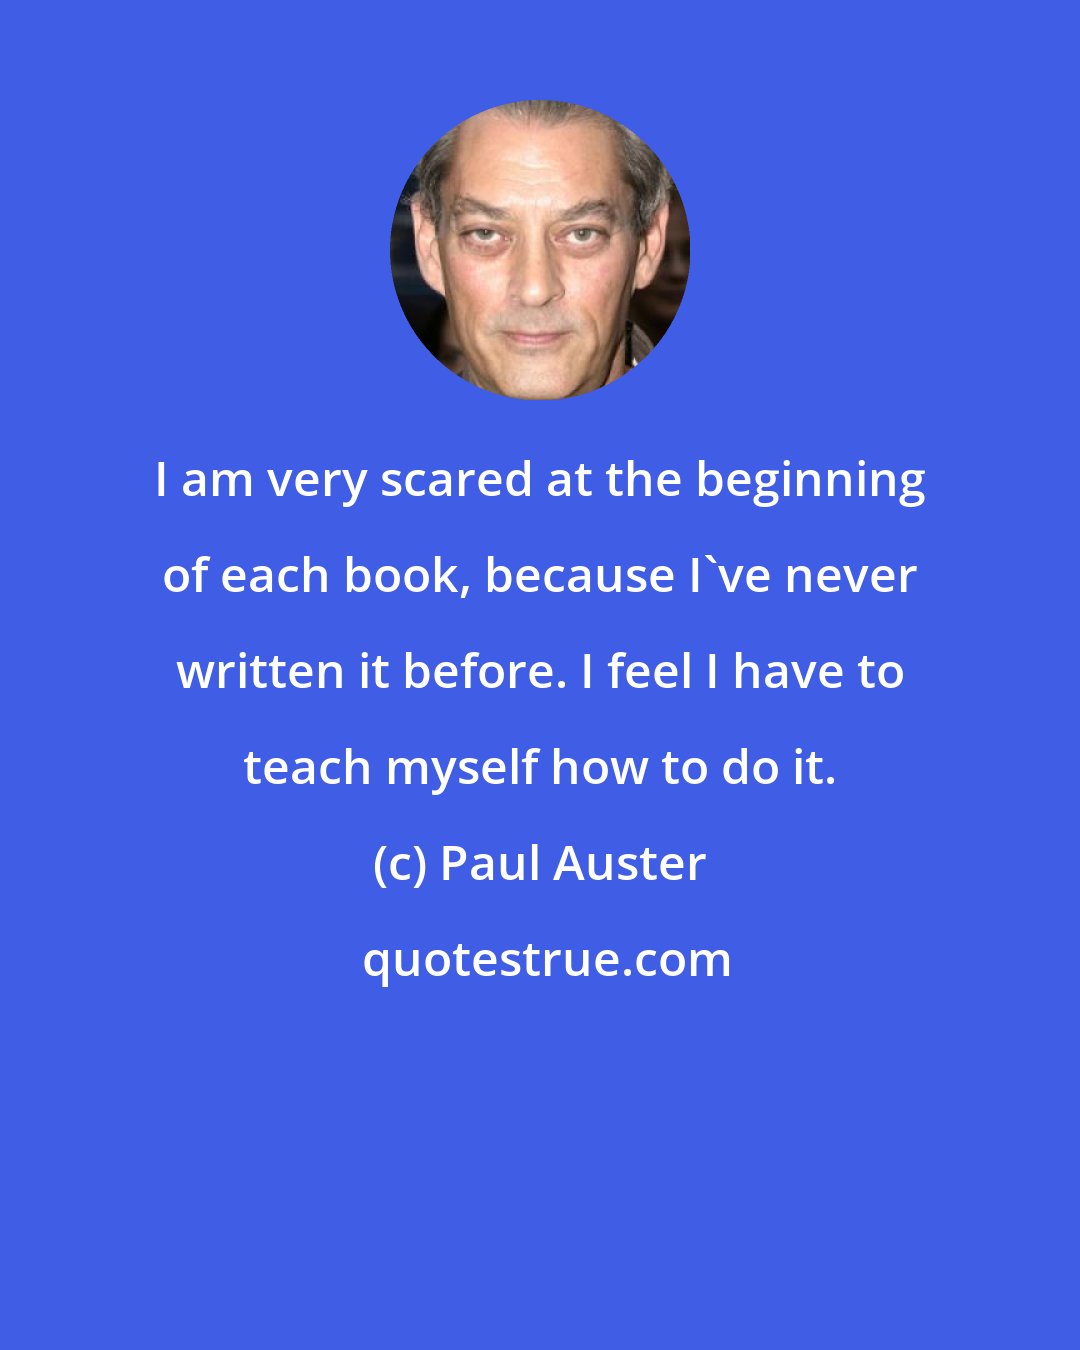 Paul Auster: I am very scared at the beginning of each book, because I've never written it before. I feel I have to teach myself how to do it.